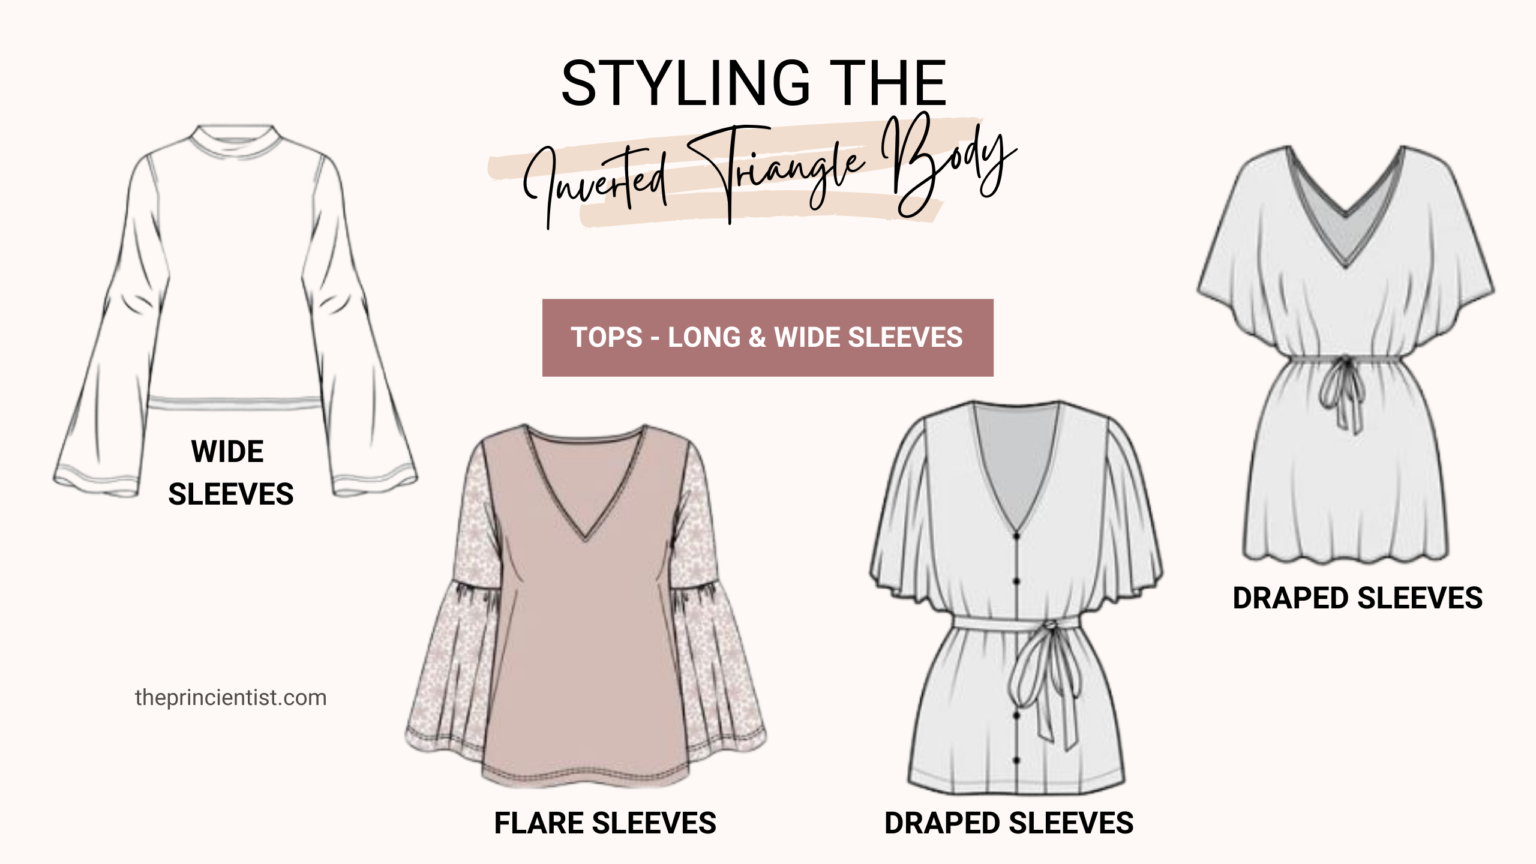 dress the inverted triangle body shape - tops long & wise sleeves